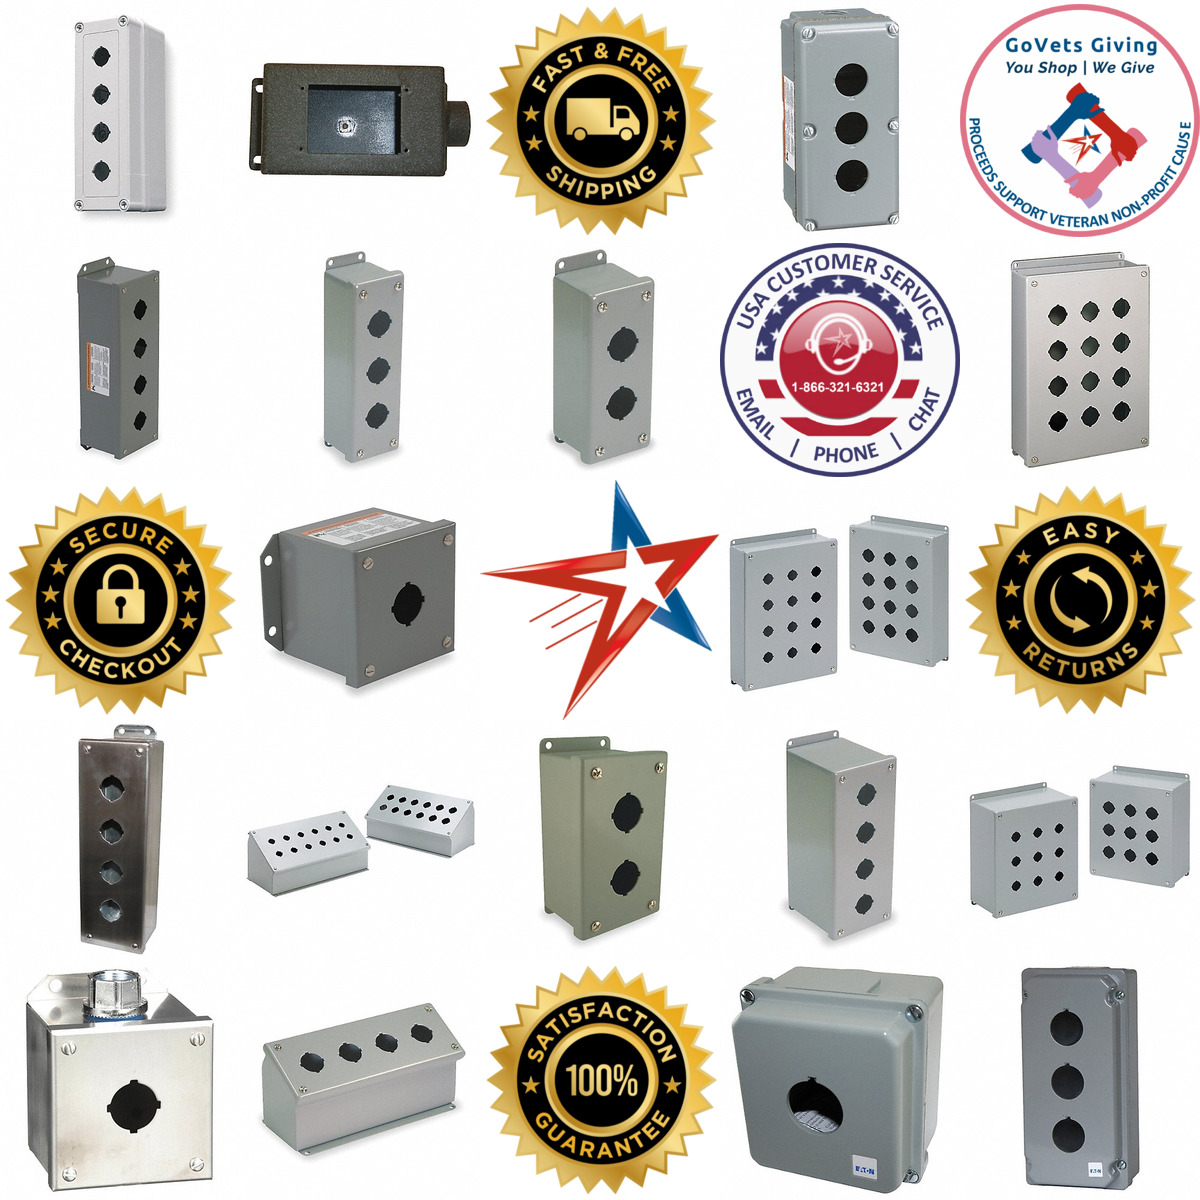 A selection of Pushbutton Enclosures products on GoVets